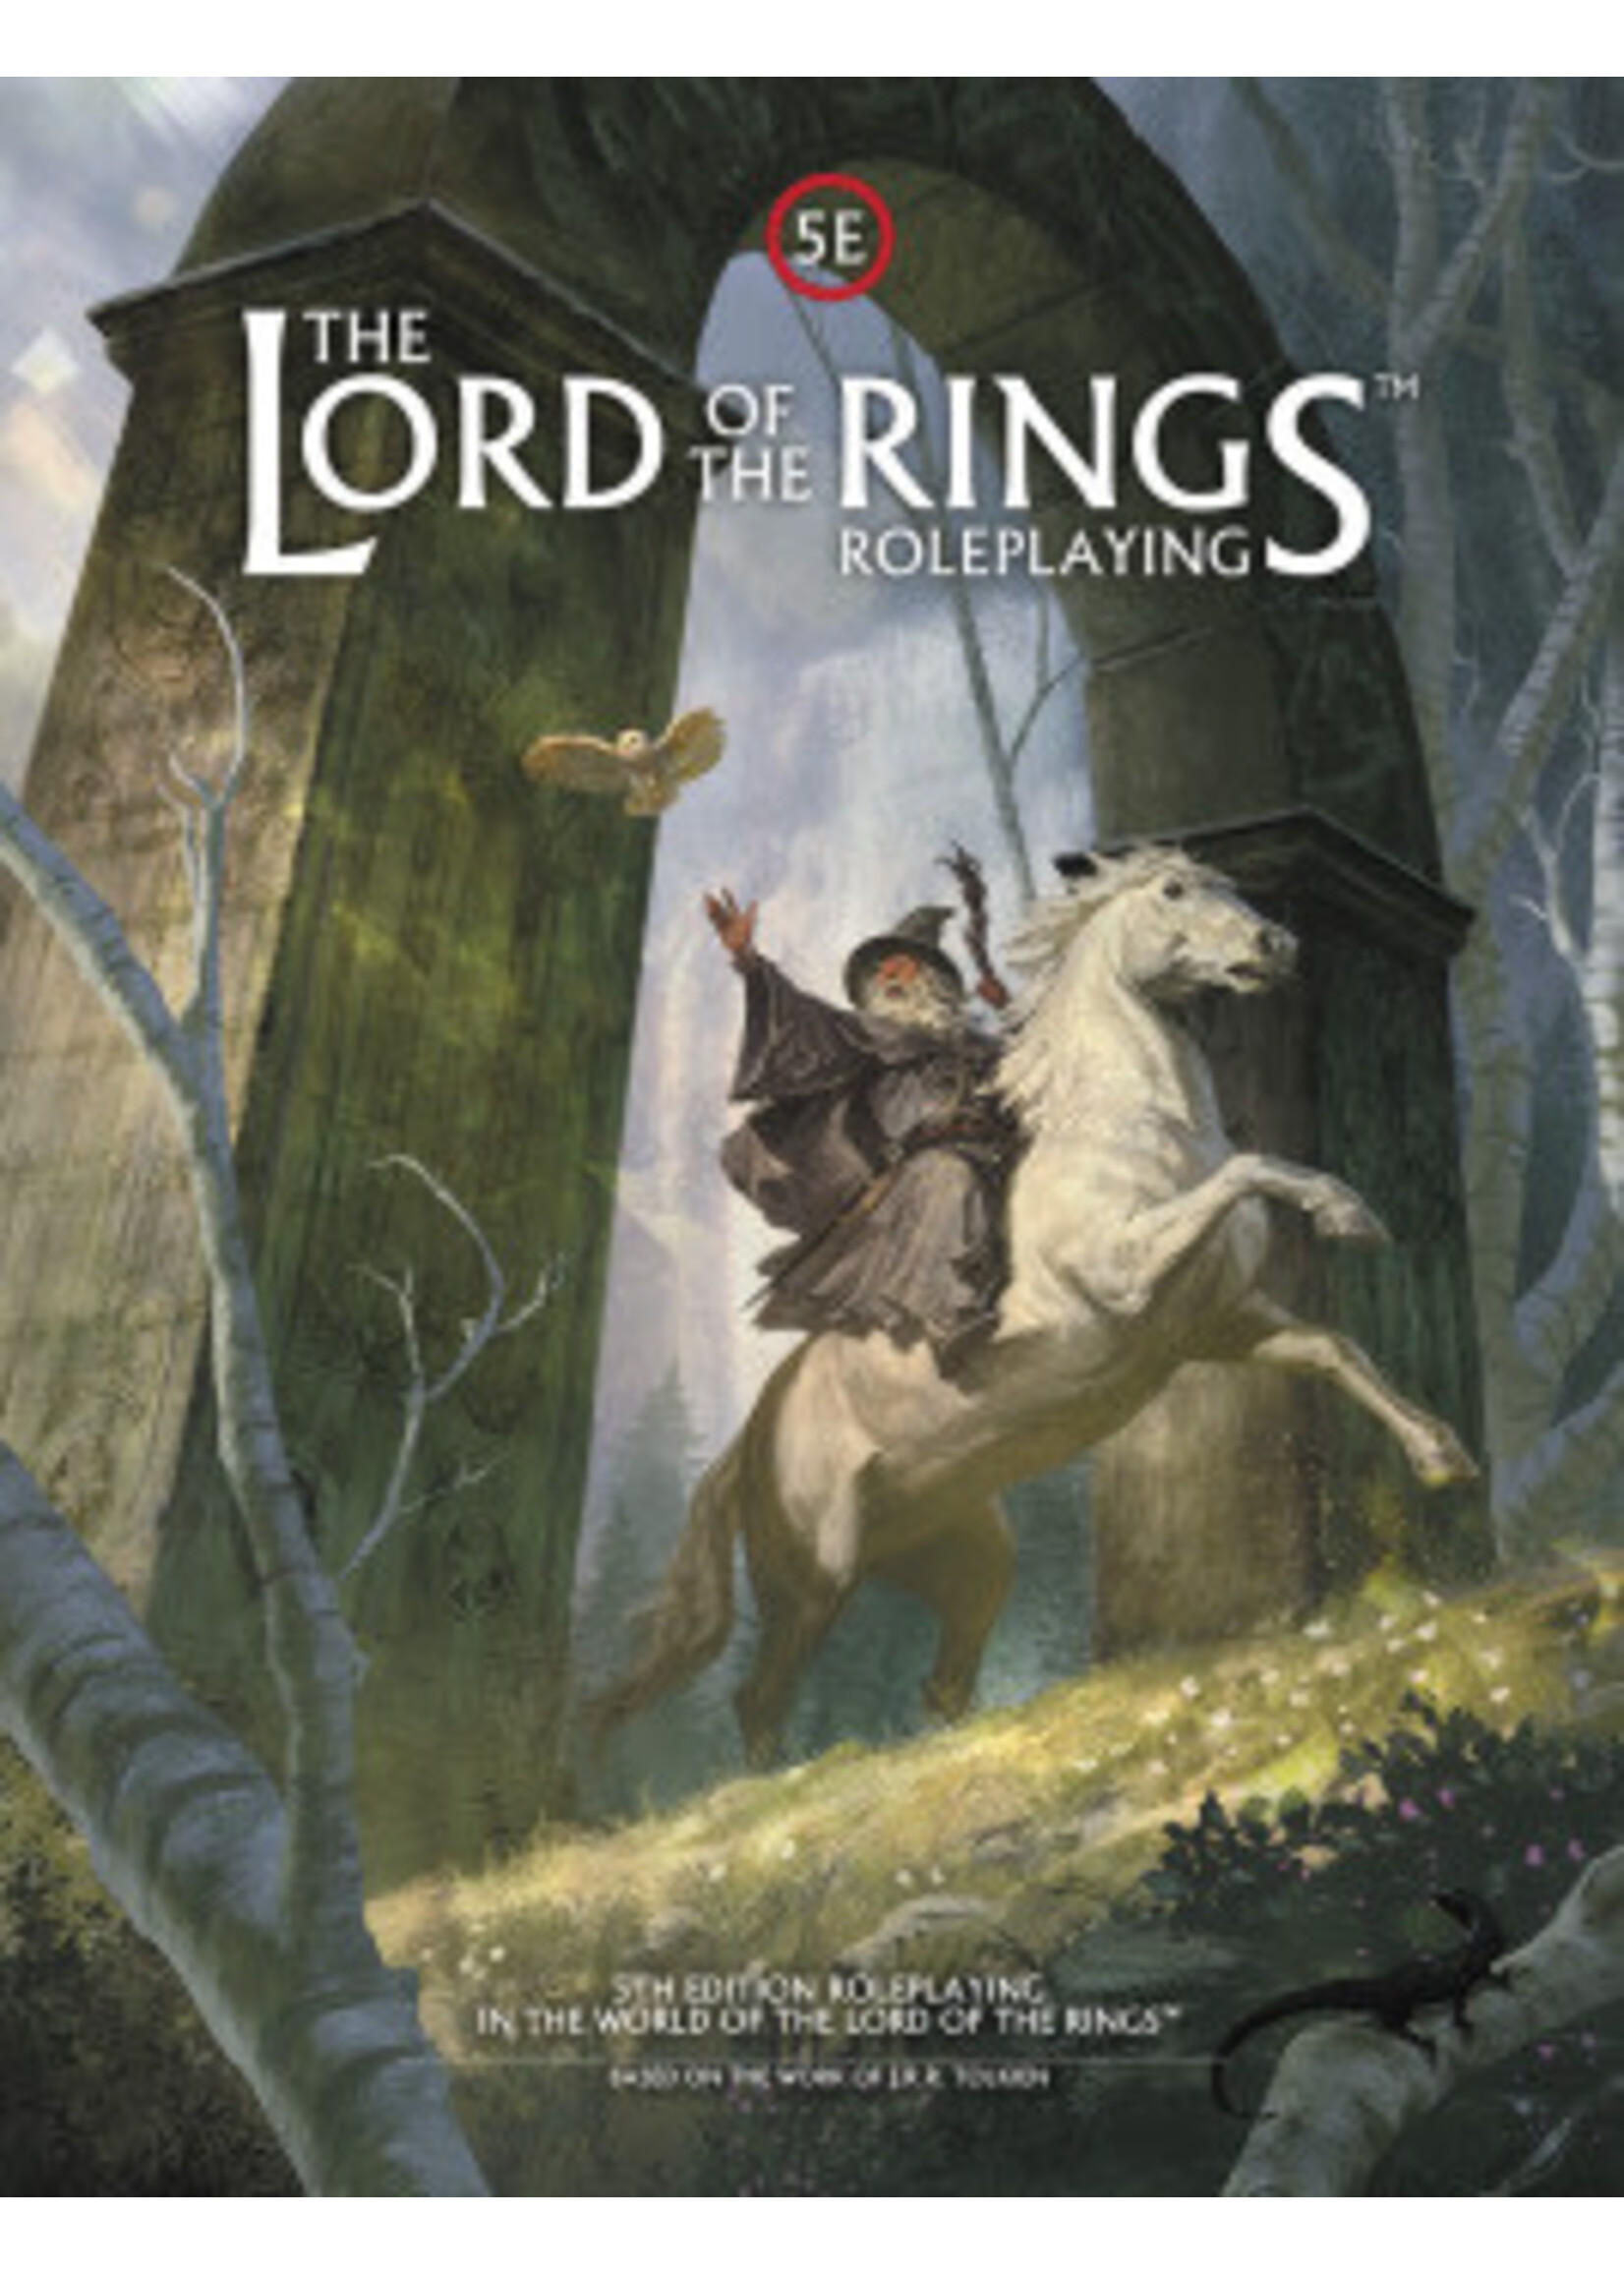 THE LORD OF THE RINGS RPG 5E CORE RULEBOOK